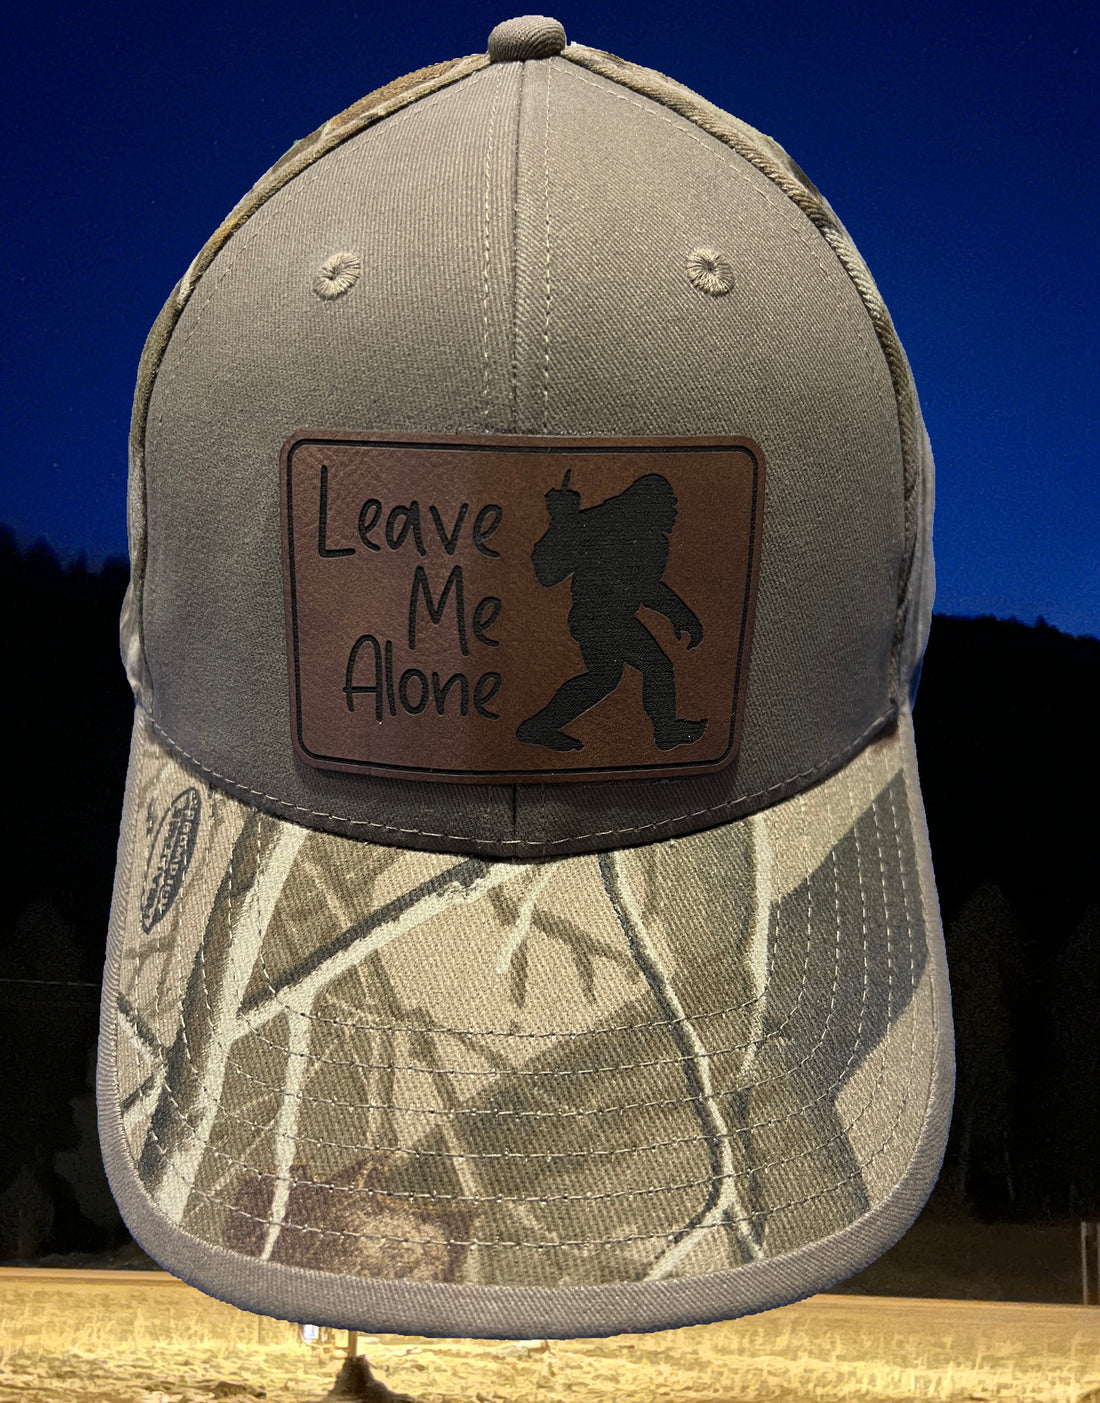 : Image of the "Bigfoot Leave Me Alone" Camo Cap, featuring a camouflage design with the iconic Bigfoot silhouette and humorous message, perfect for outdoor enthusiasts looking to blend in while expressing their need for solitude.